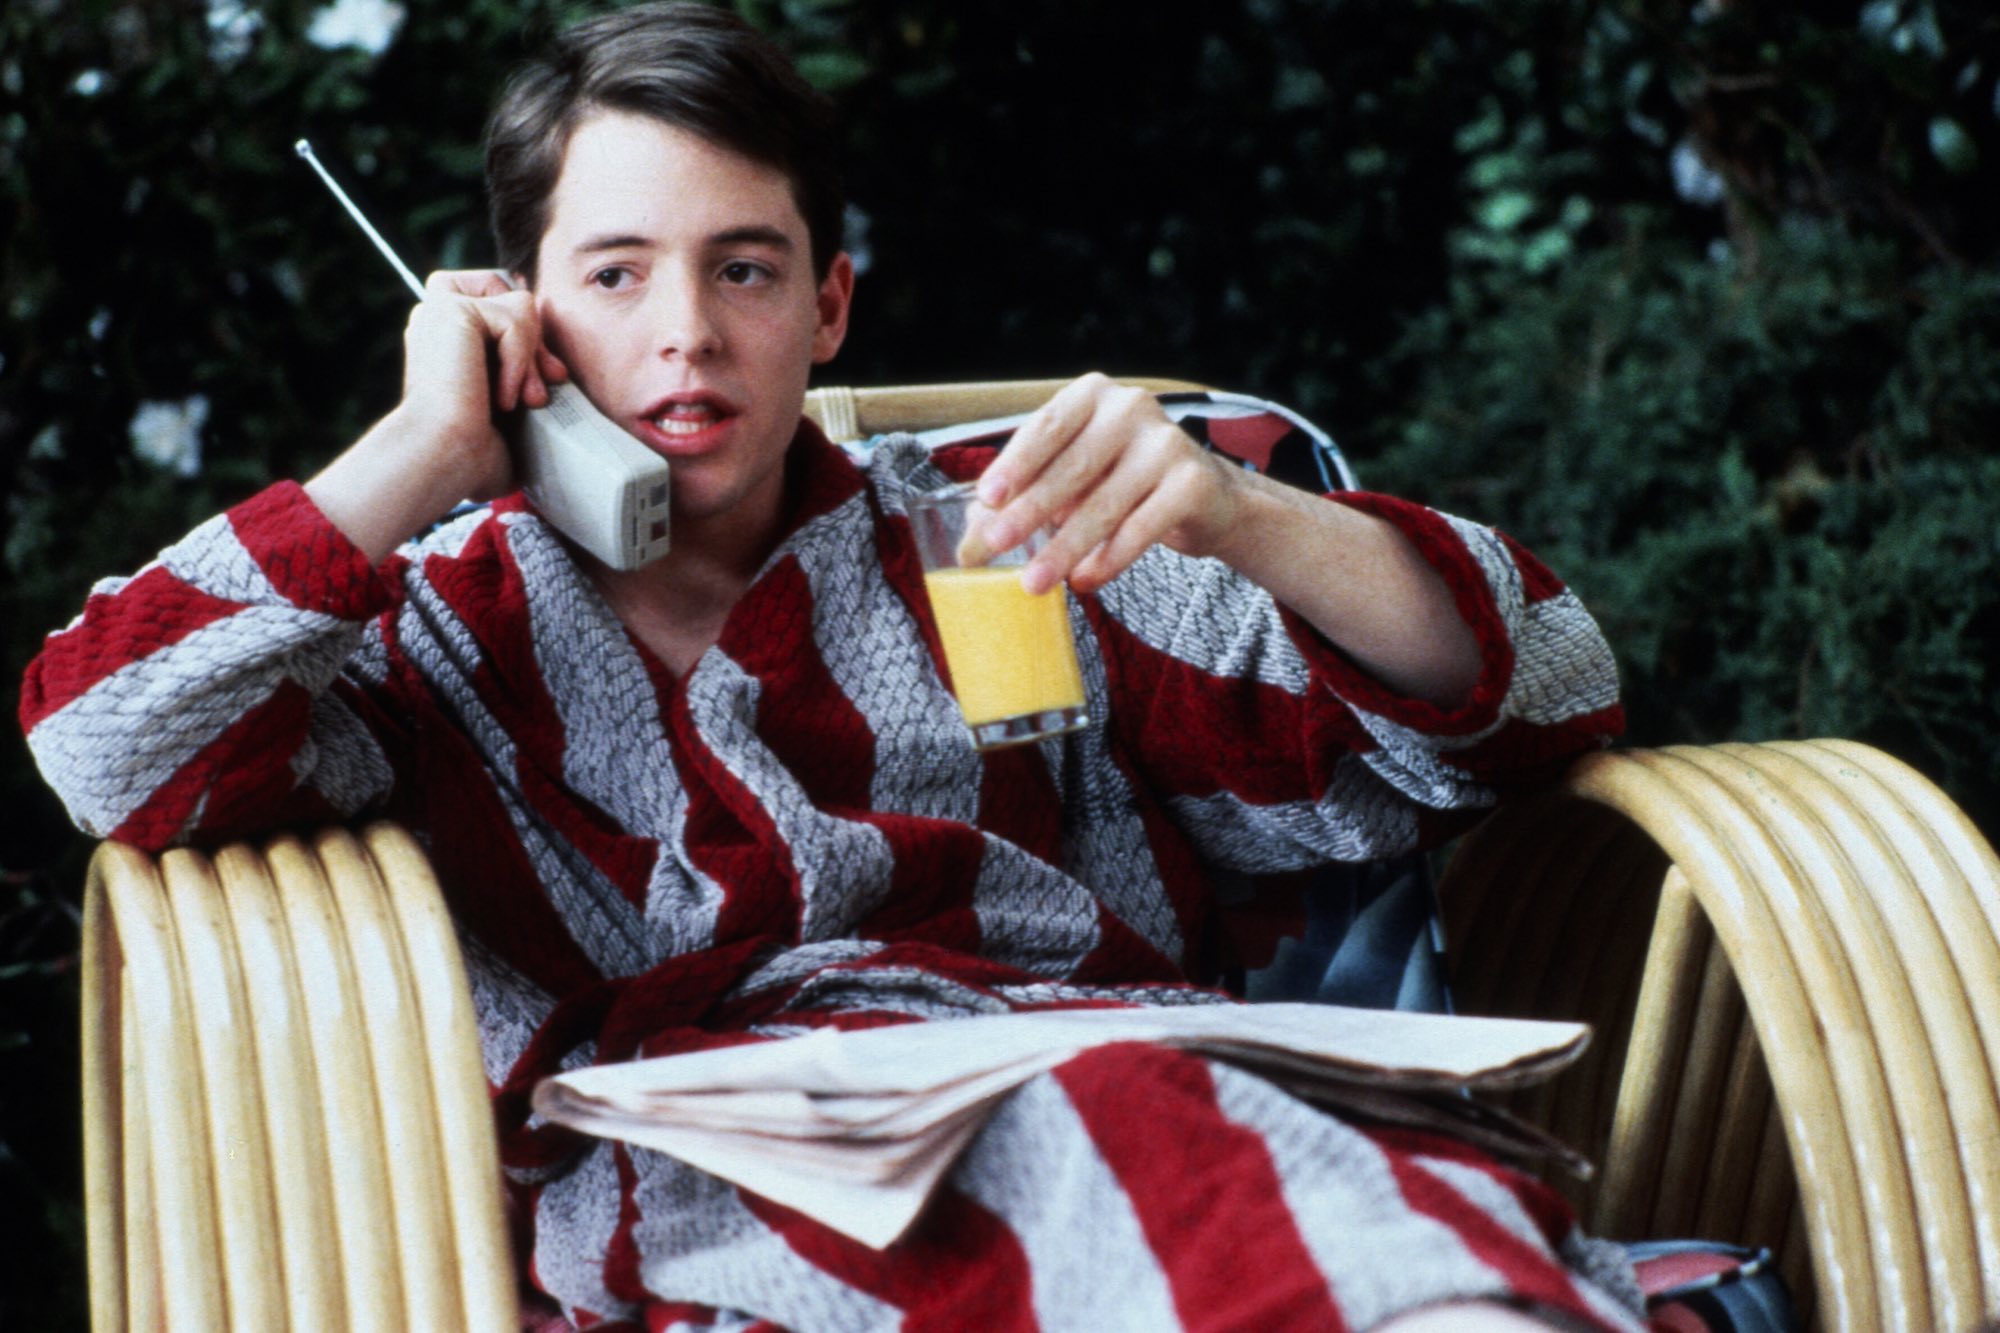 John Hughes movie season, including Ferris Bueller’s Day Off and The Breakf...